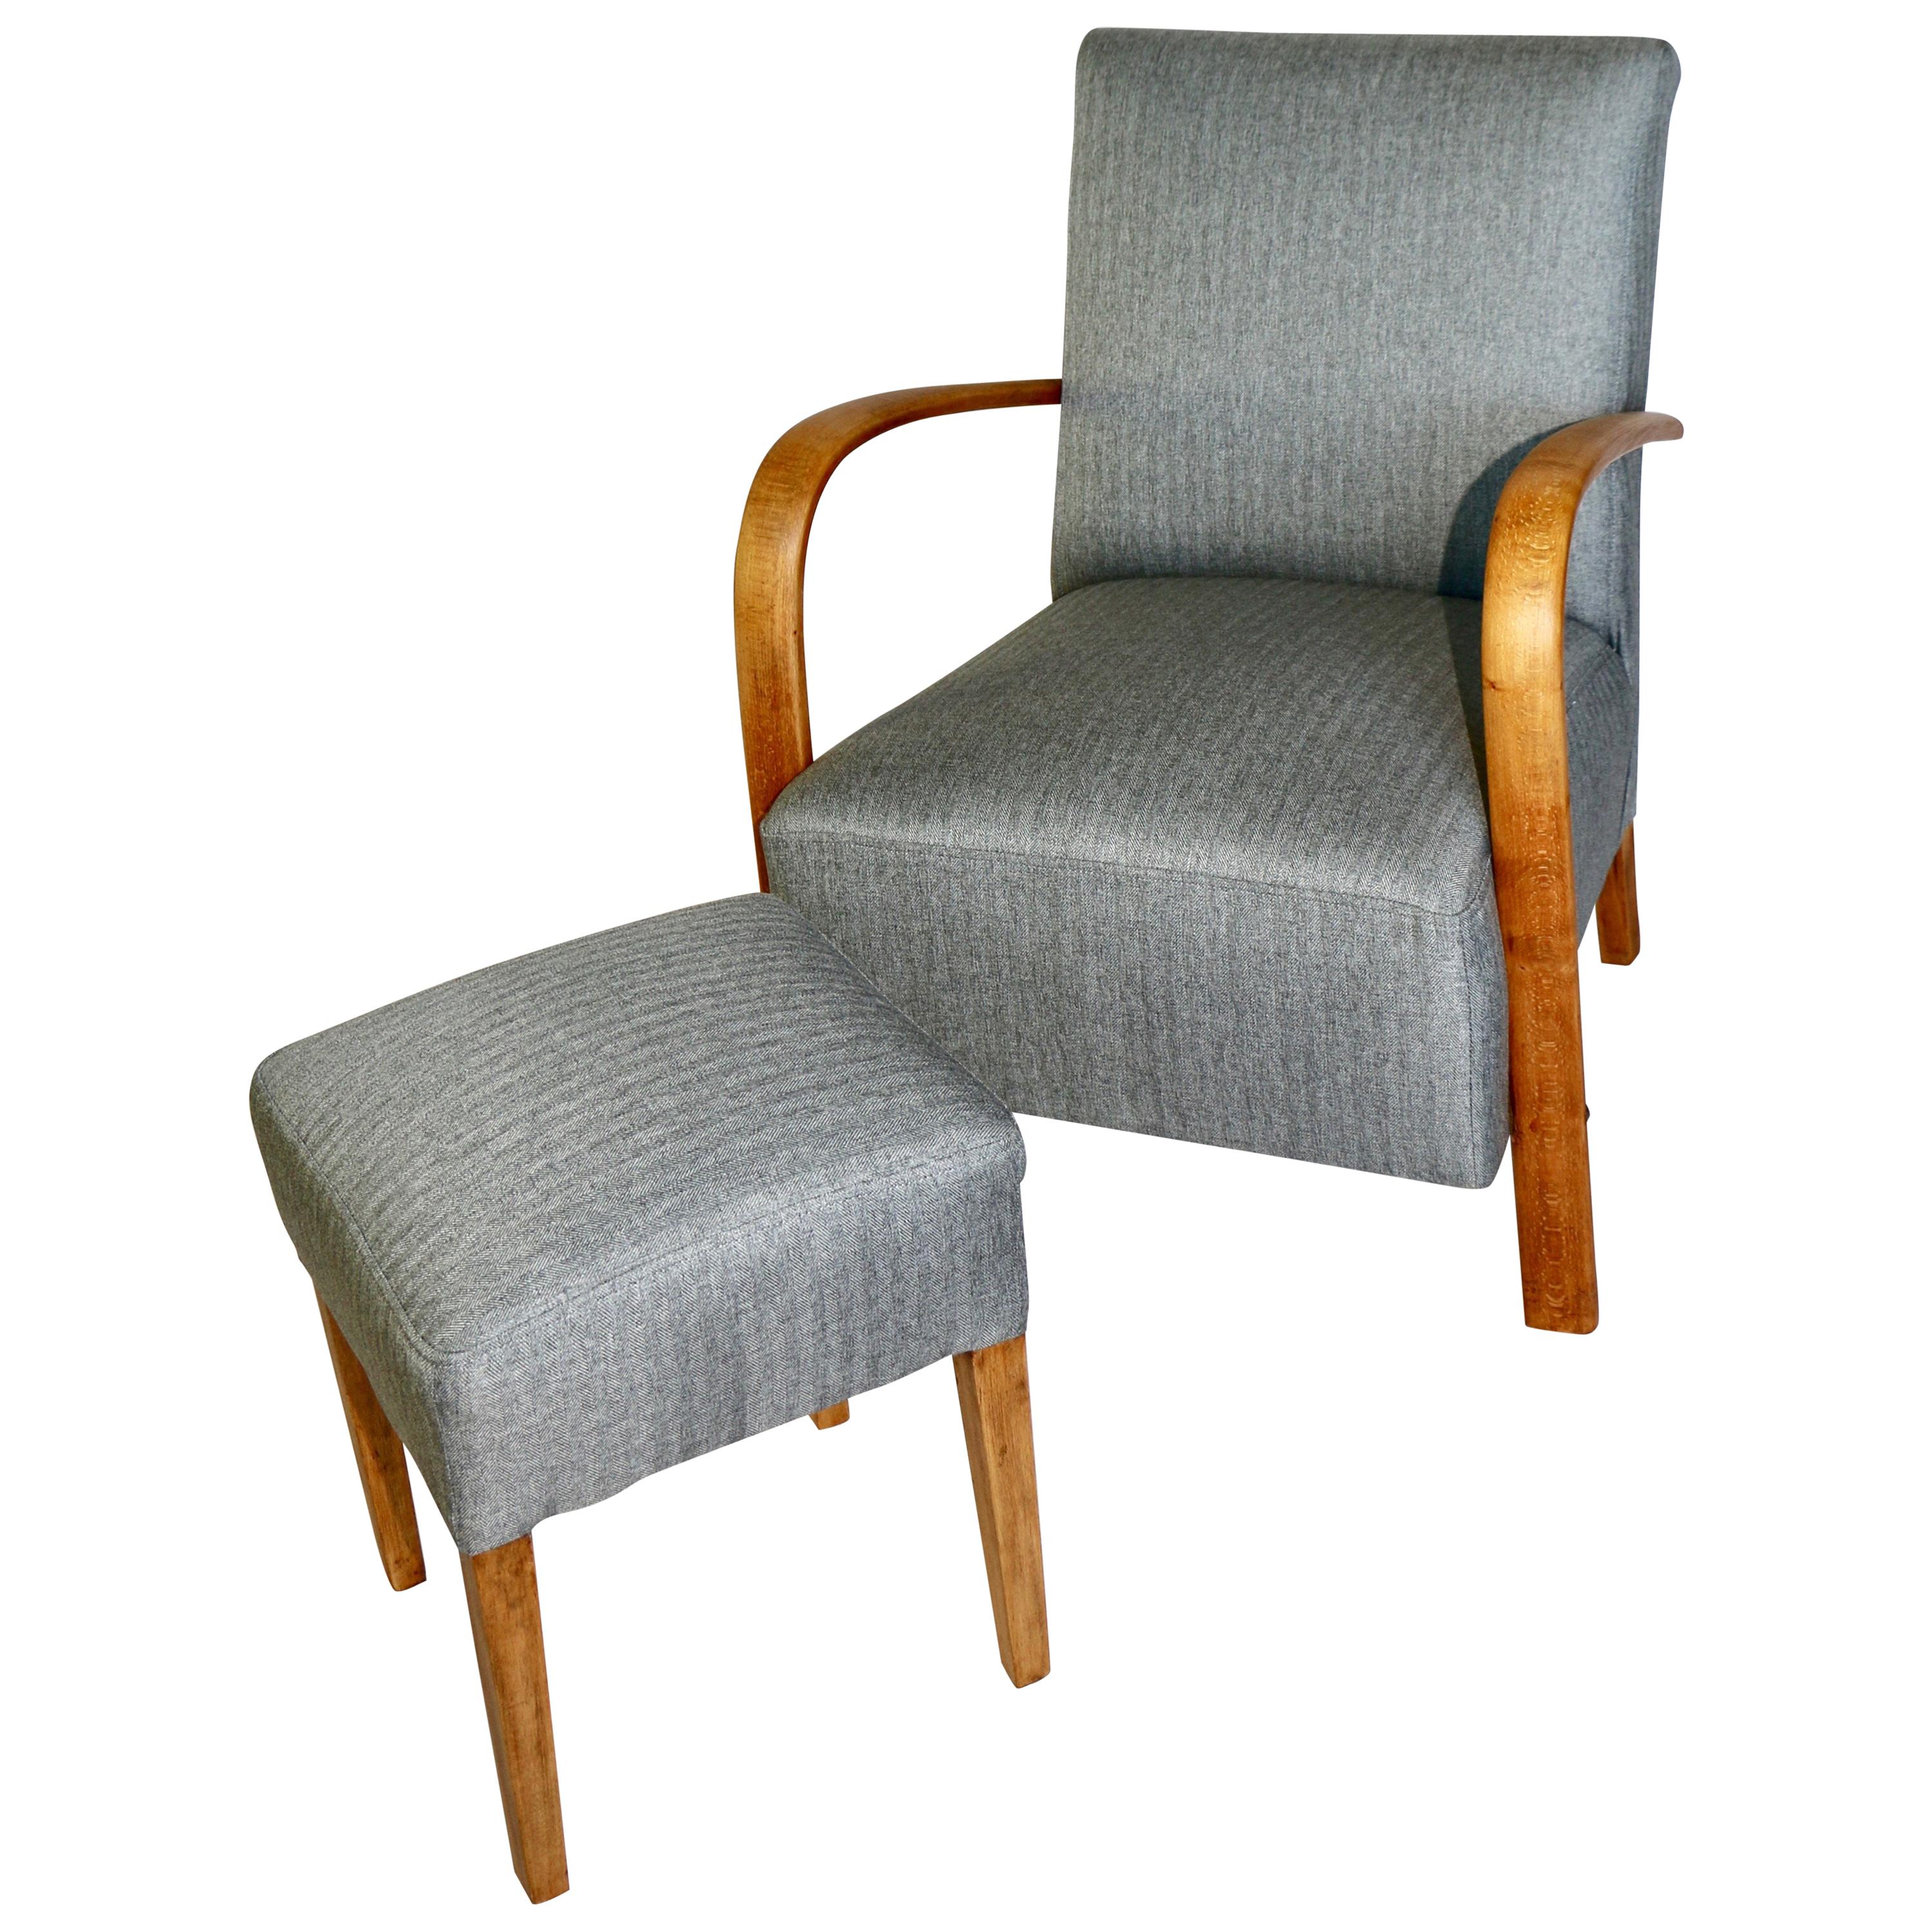 Set of Art Deco Armchair with Footrest Seat in Gray from 20th Century